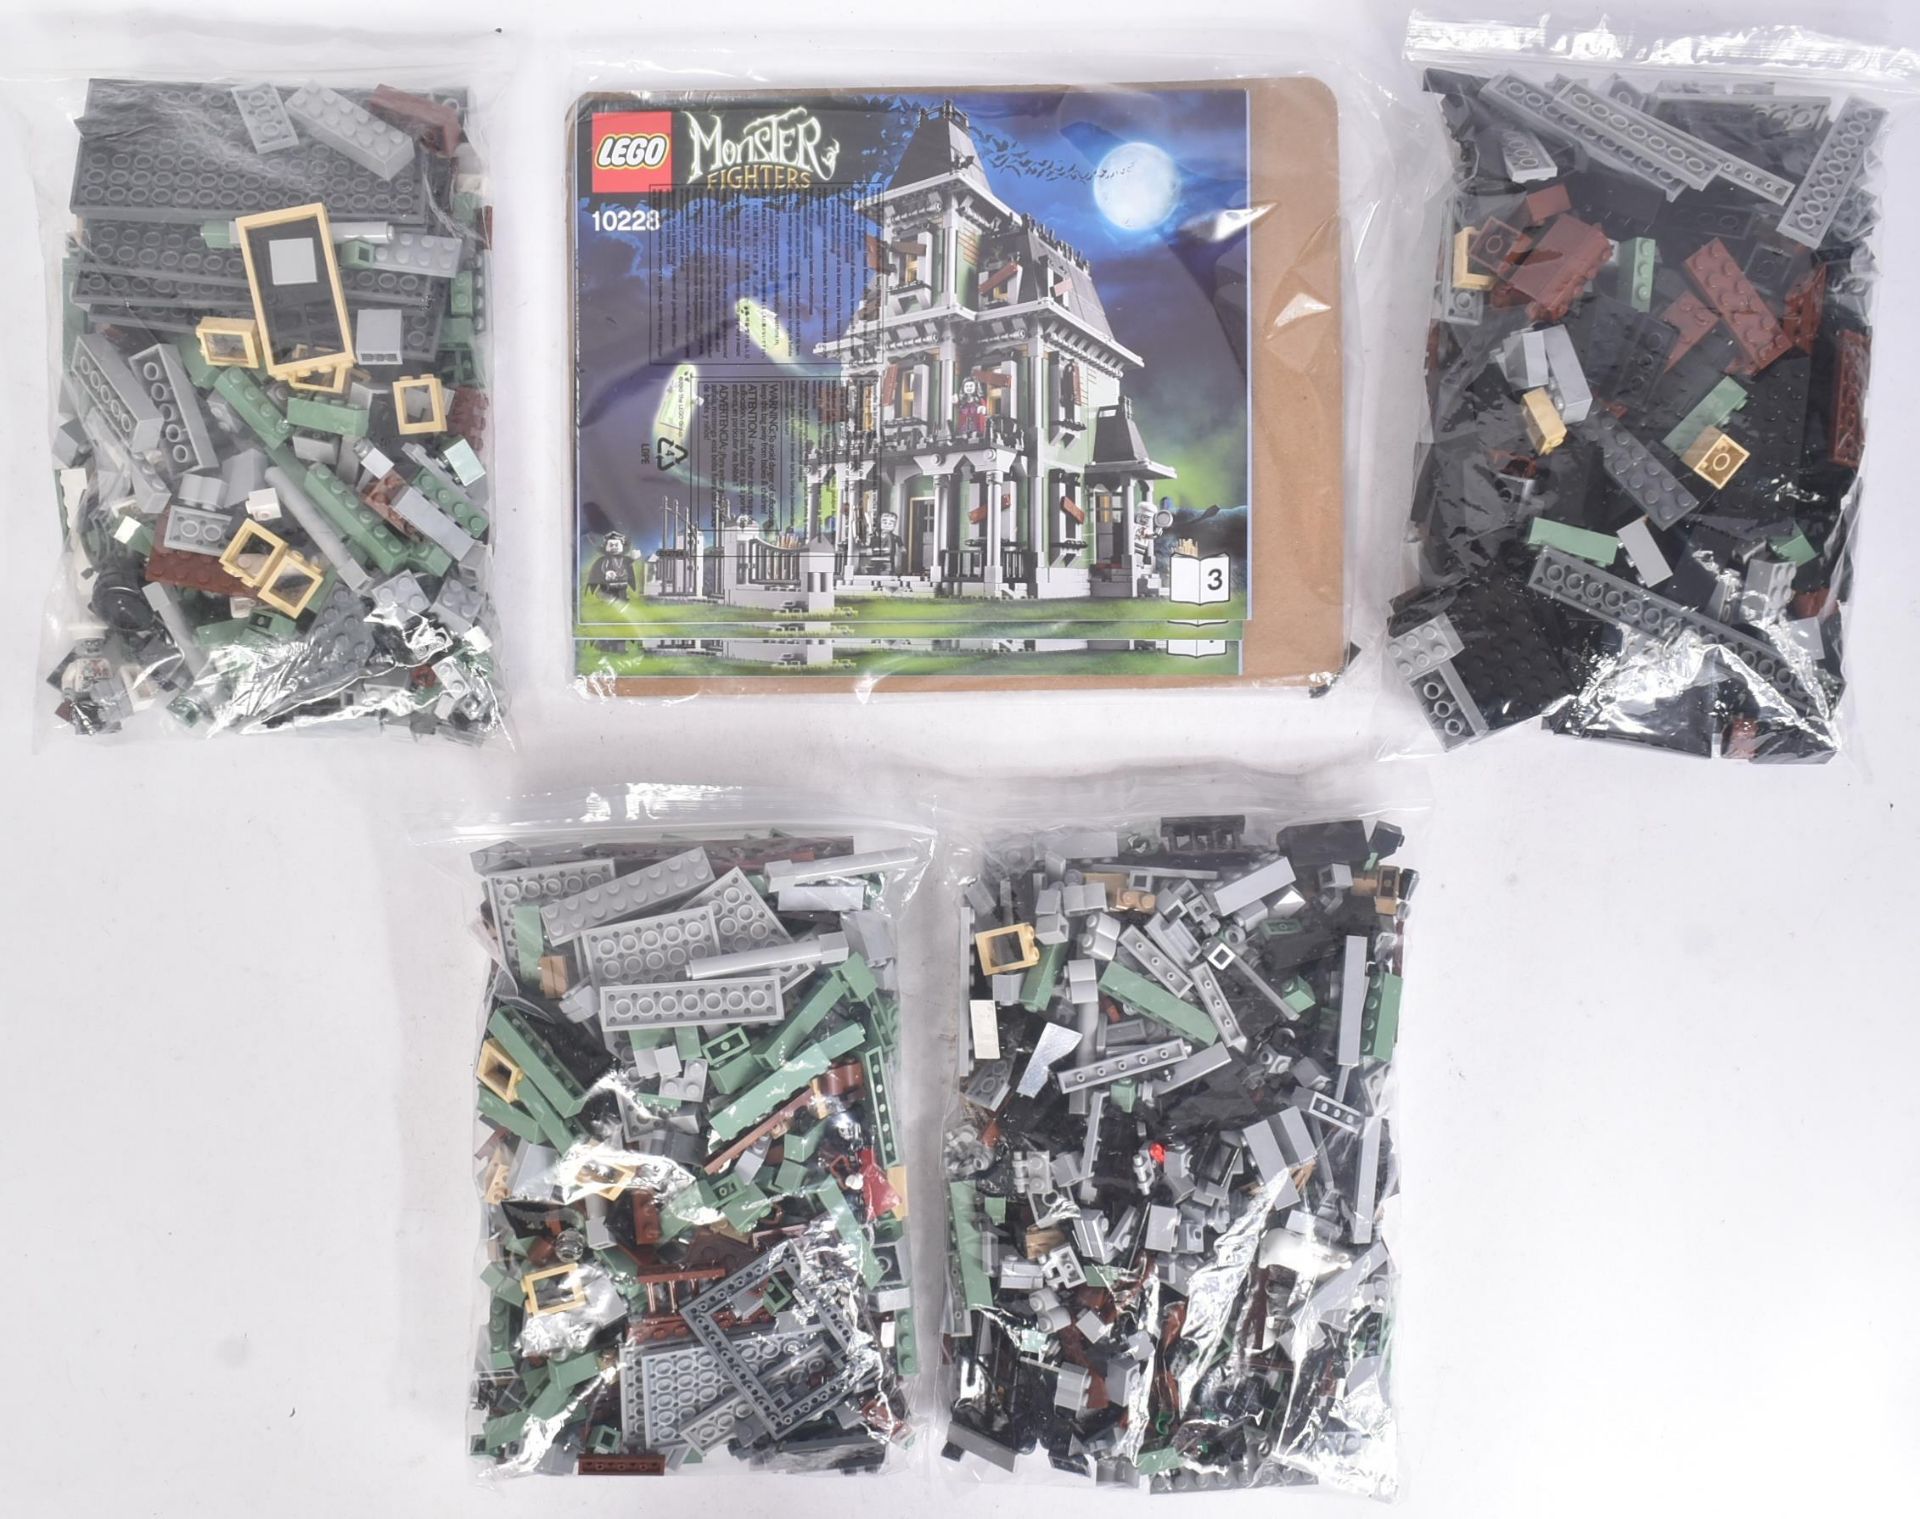 LEGO - MONSTER FIGHTERS - 10228 - THE HAUNTED HOUSE - Image 2 of 6